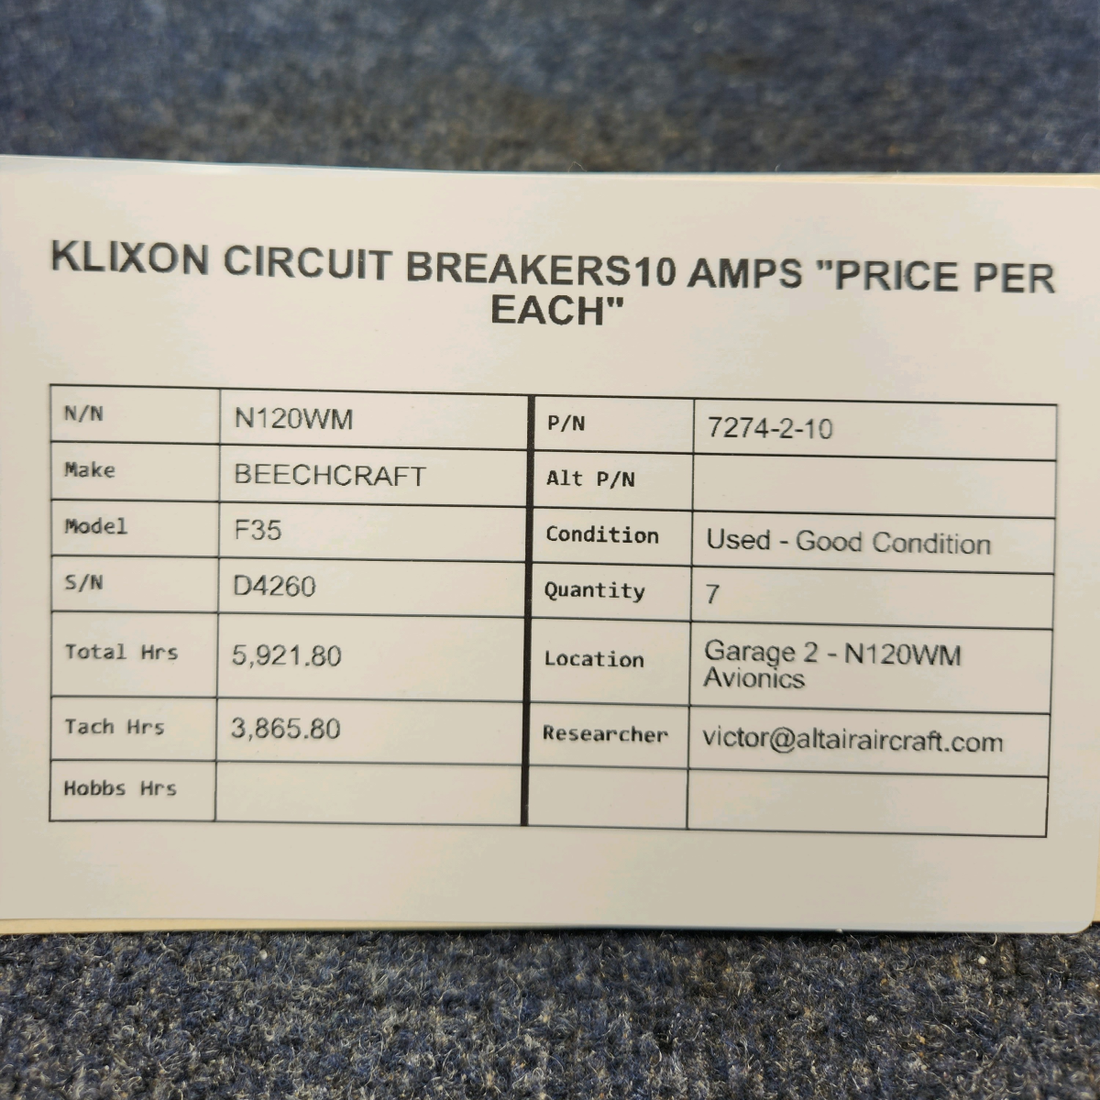 Used aircraft parts for sale, 7274-2-10 BEECHCRAFT F35 KLIXON CIRCUIT BREAKERS10 AMPS "PRICE PER EACH"